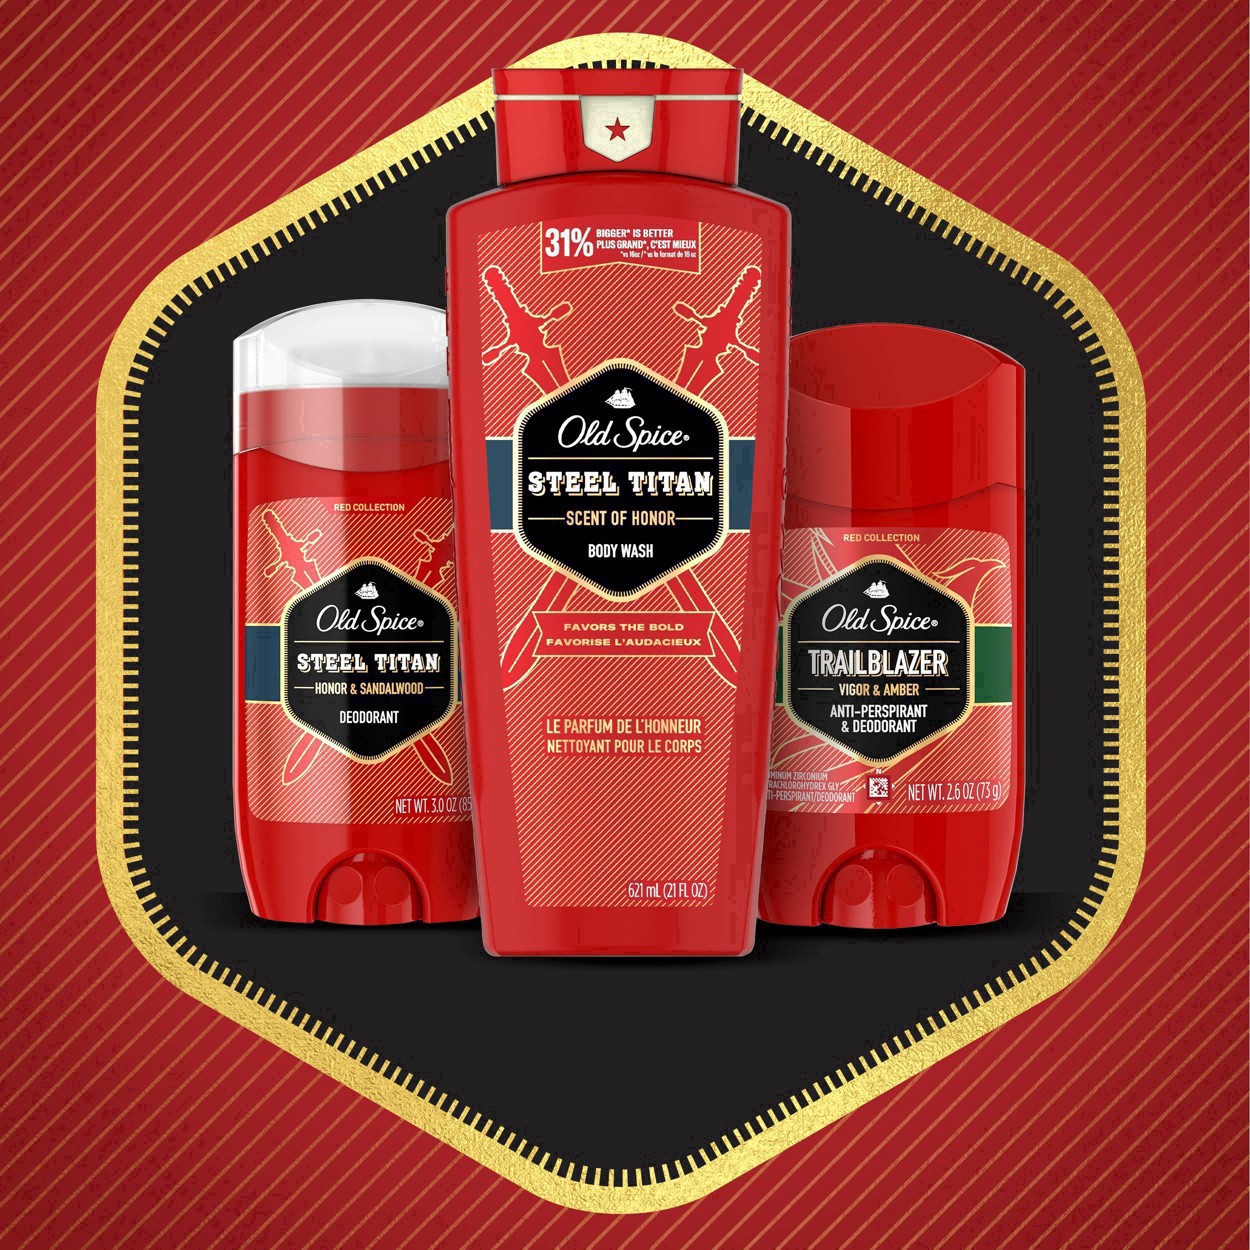 slide 31 of 95, Old Spice Red Collection Swagger Scent Deodorant for Men, Value Pack, 3.0 oz, Pack of 2, 2 ct; 3 oz